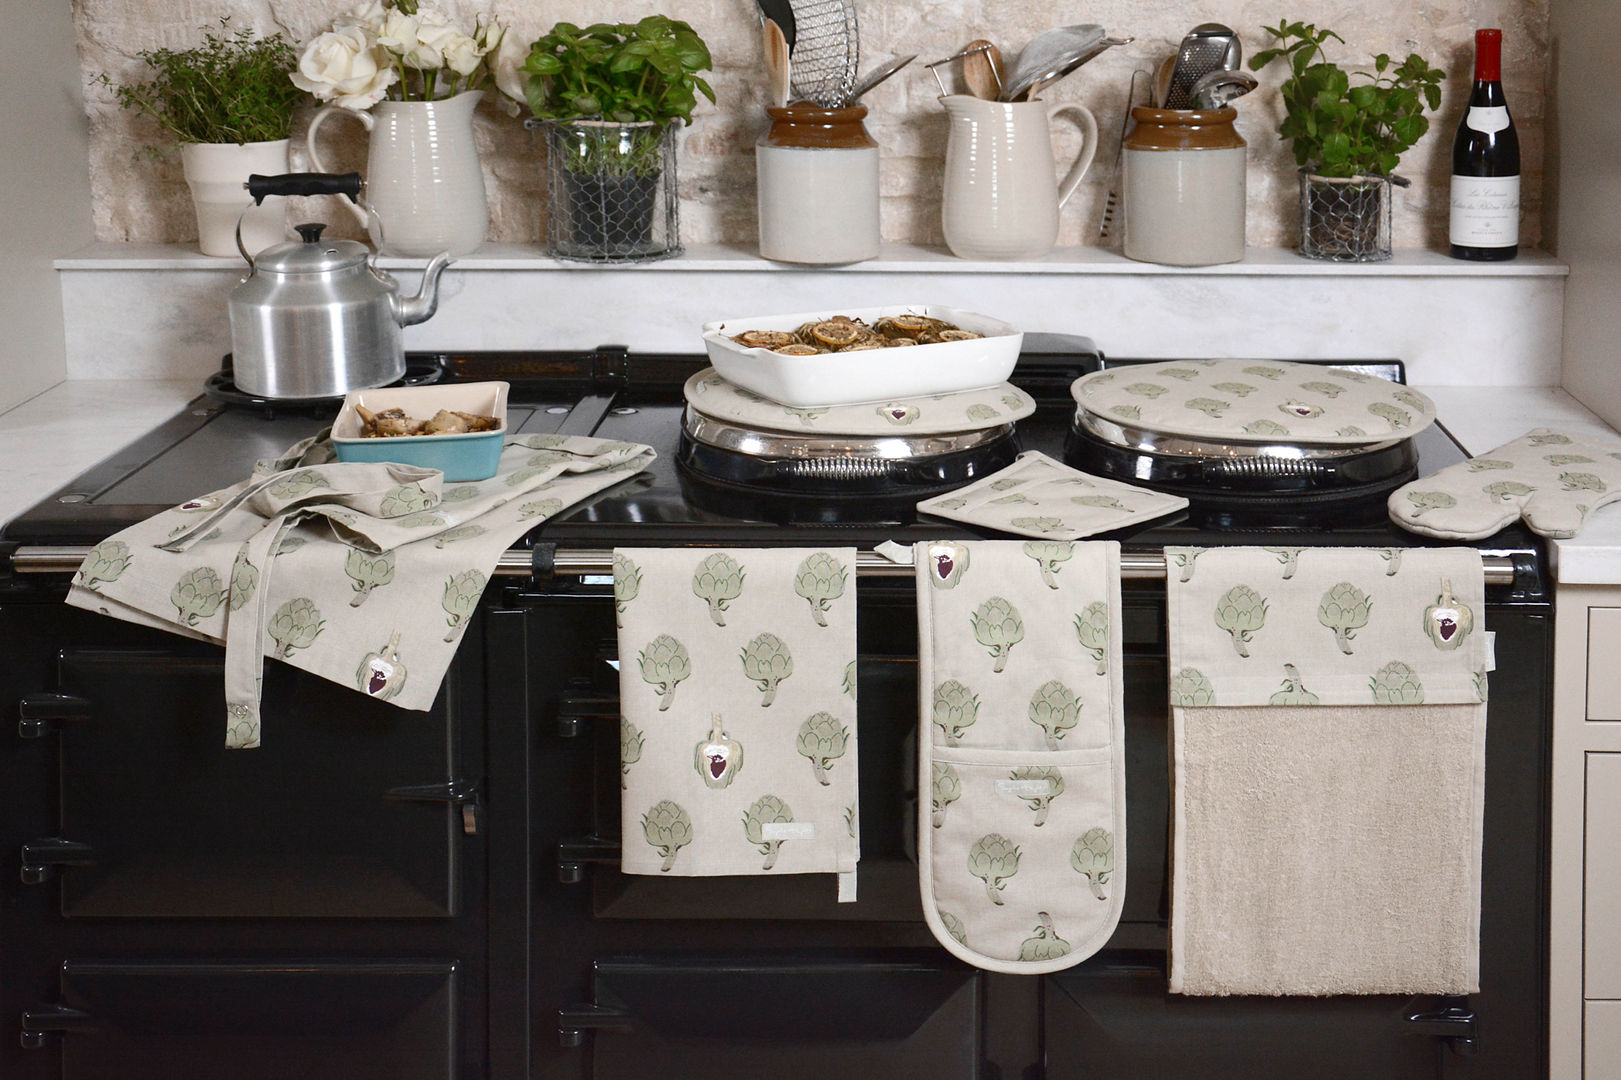 Artichoke Kitchen Collection homify Dapur Gaya Country Katun Red Accessories & textiles